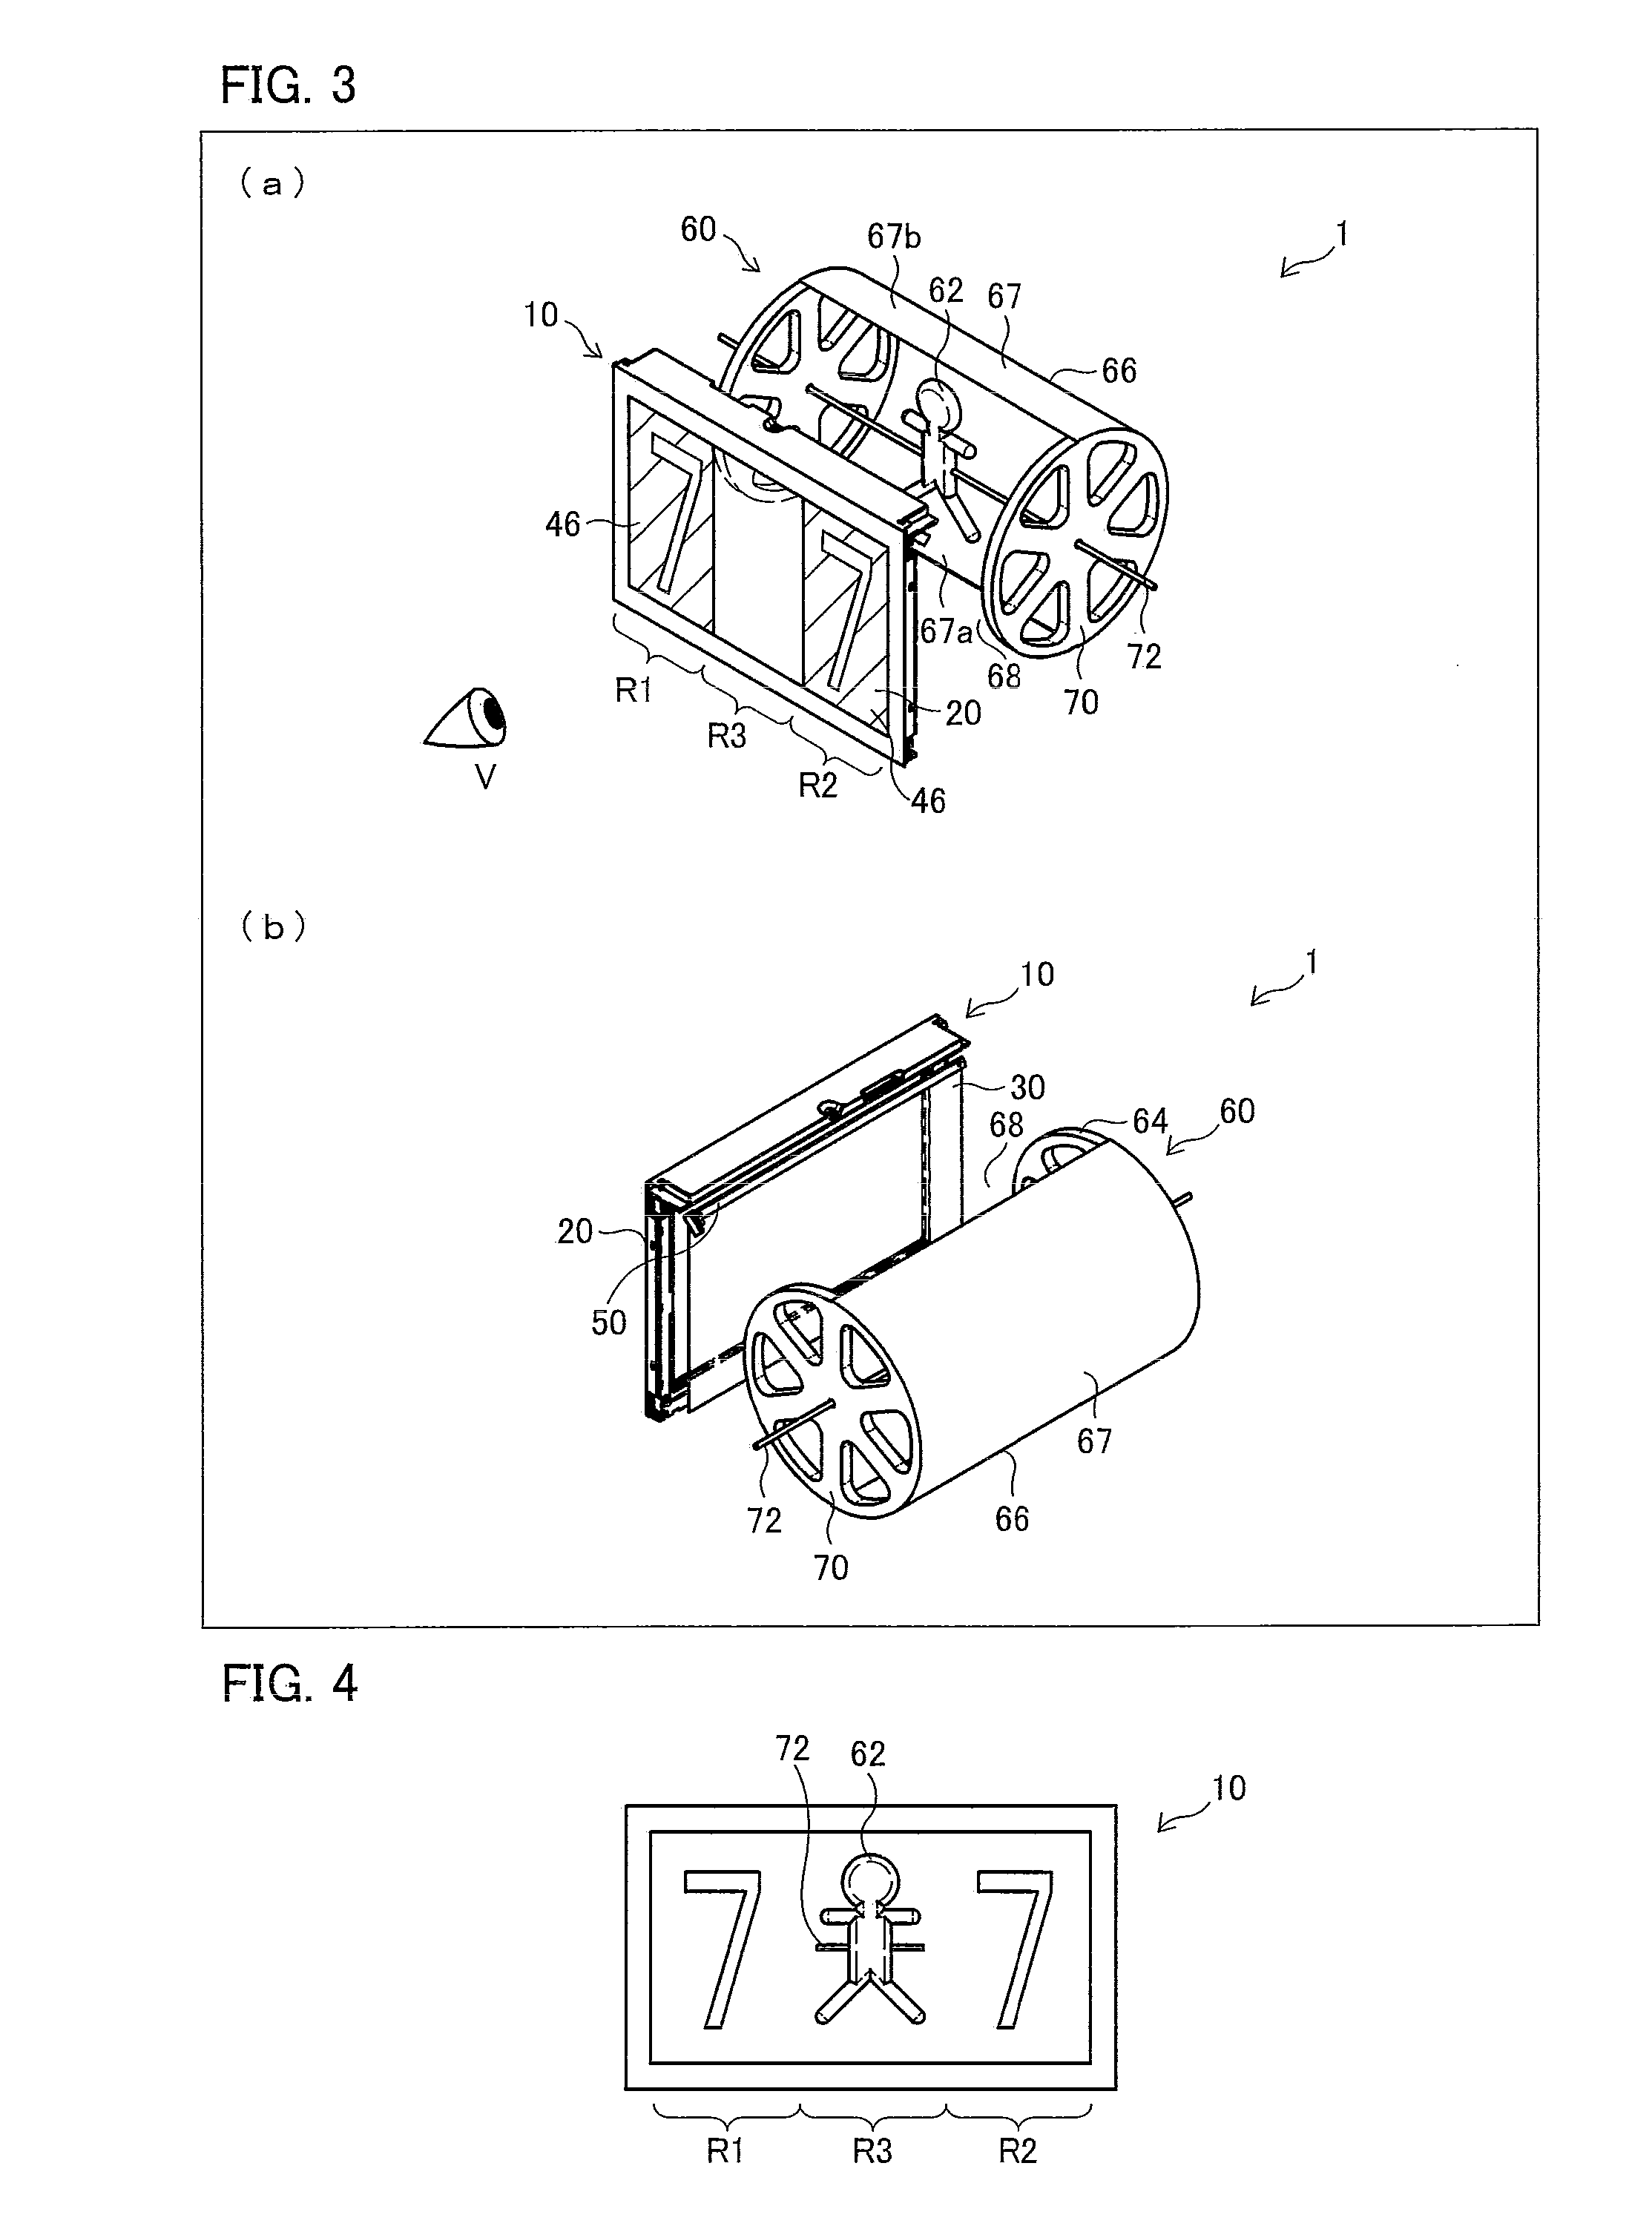 Liquid crystal display unit, game device and display method for use in liquid crystal display unit